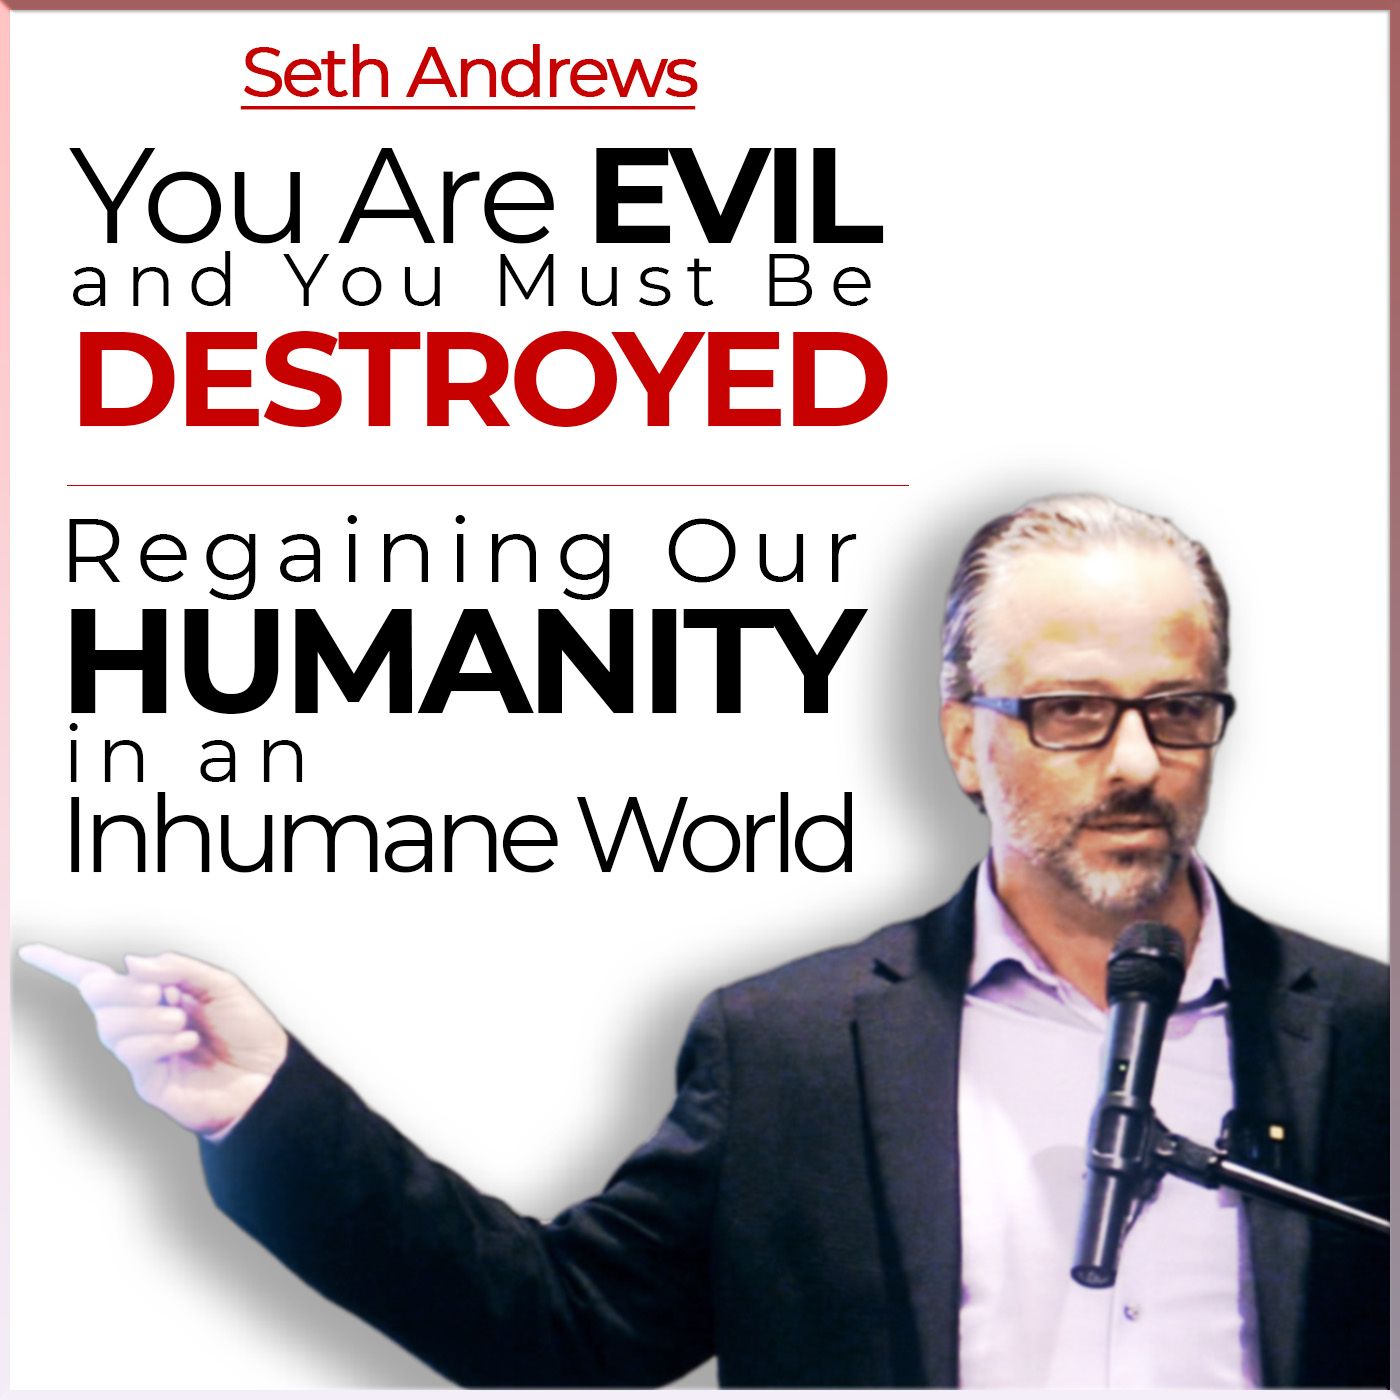 You Are Evil and You Must Be Destroyed: Regaining our Humanity in an Inhumane World